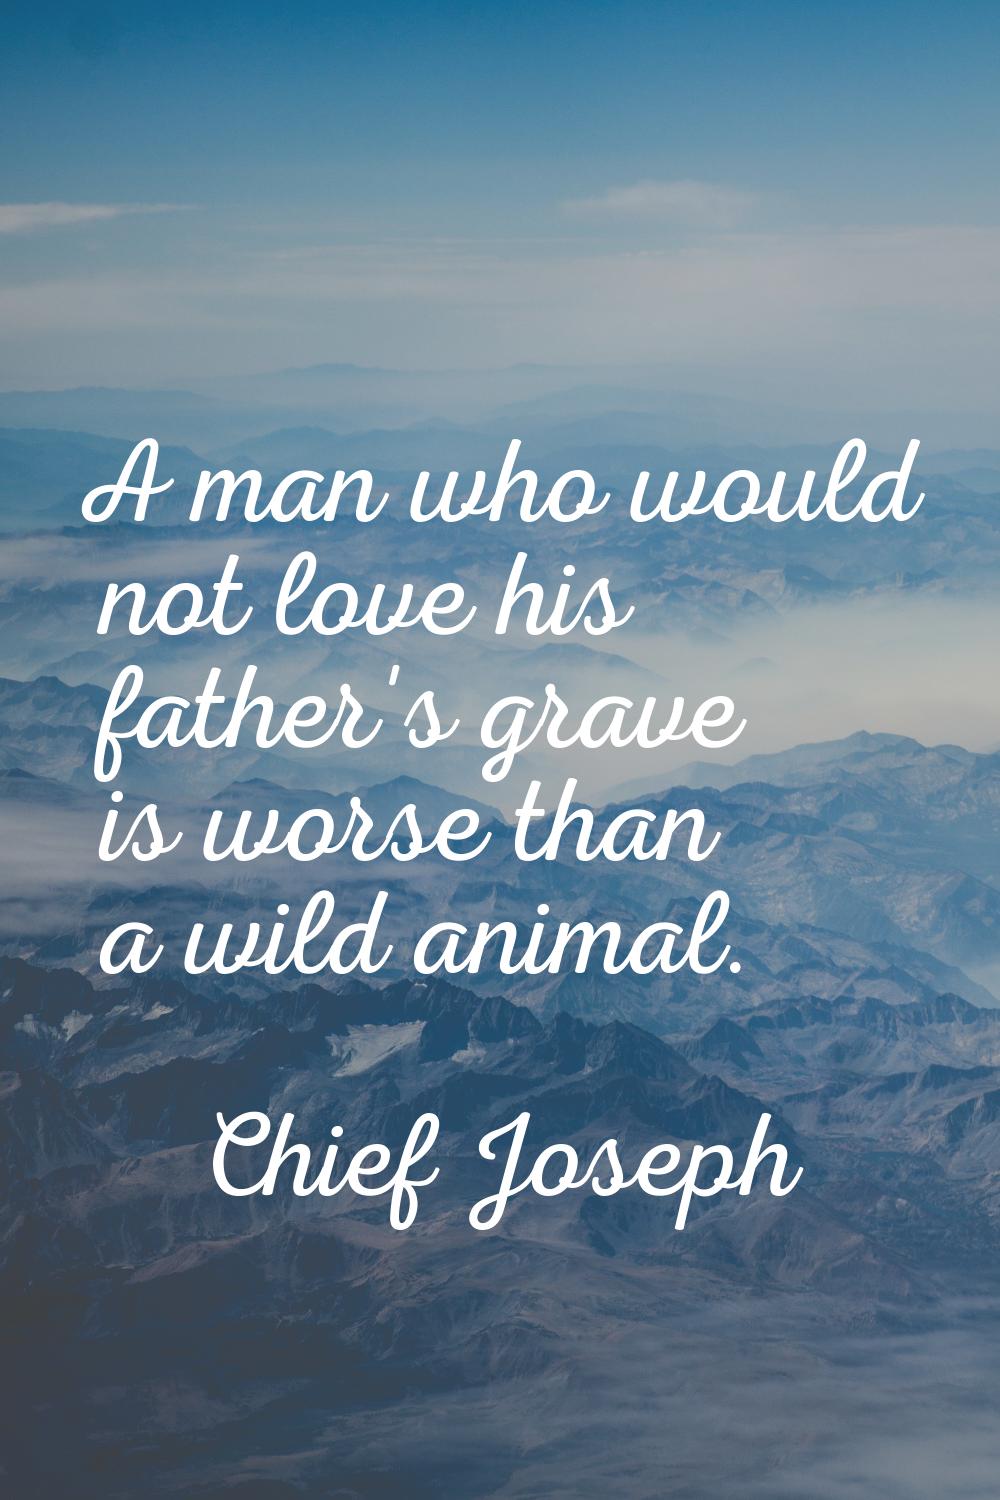 A man who would not love his father's grave is worse than a wild animal.